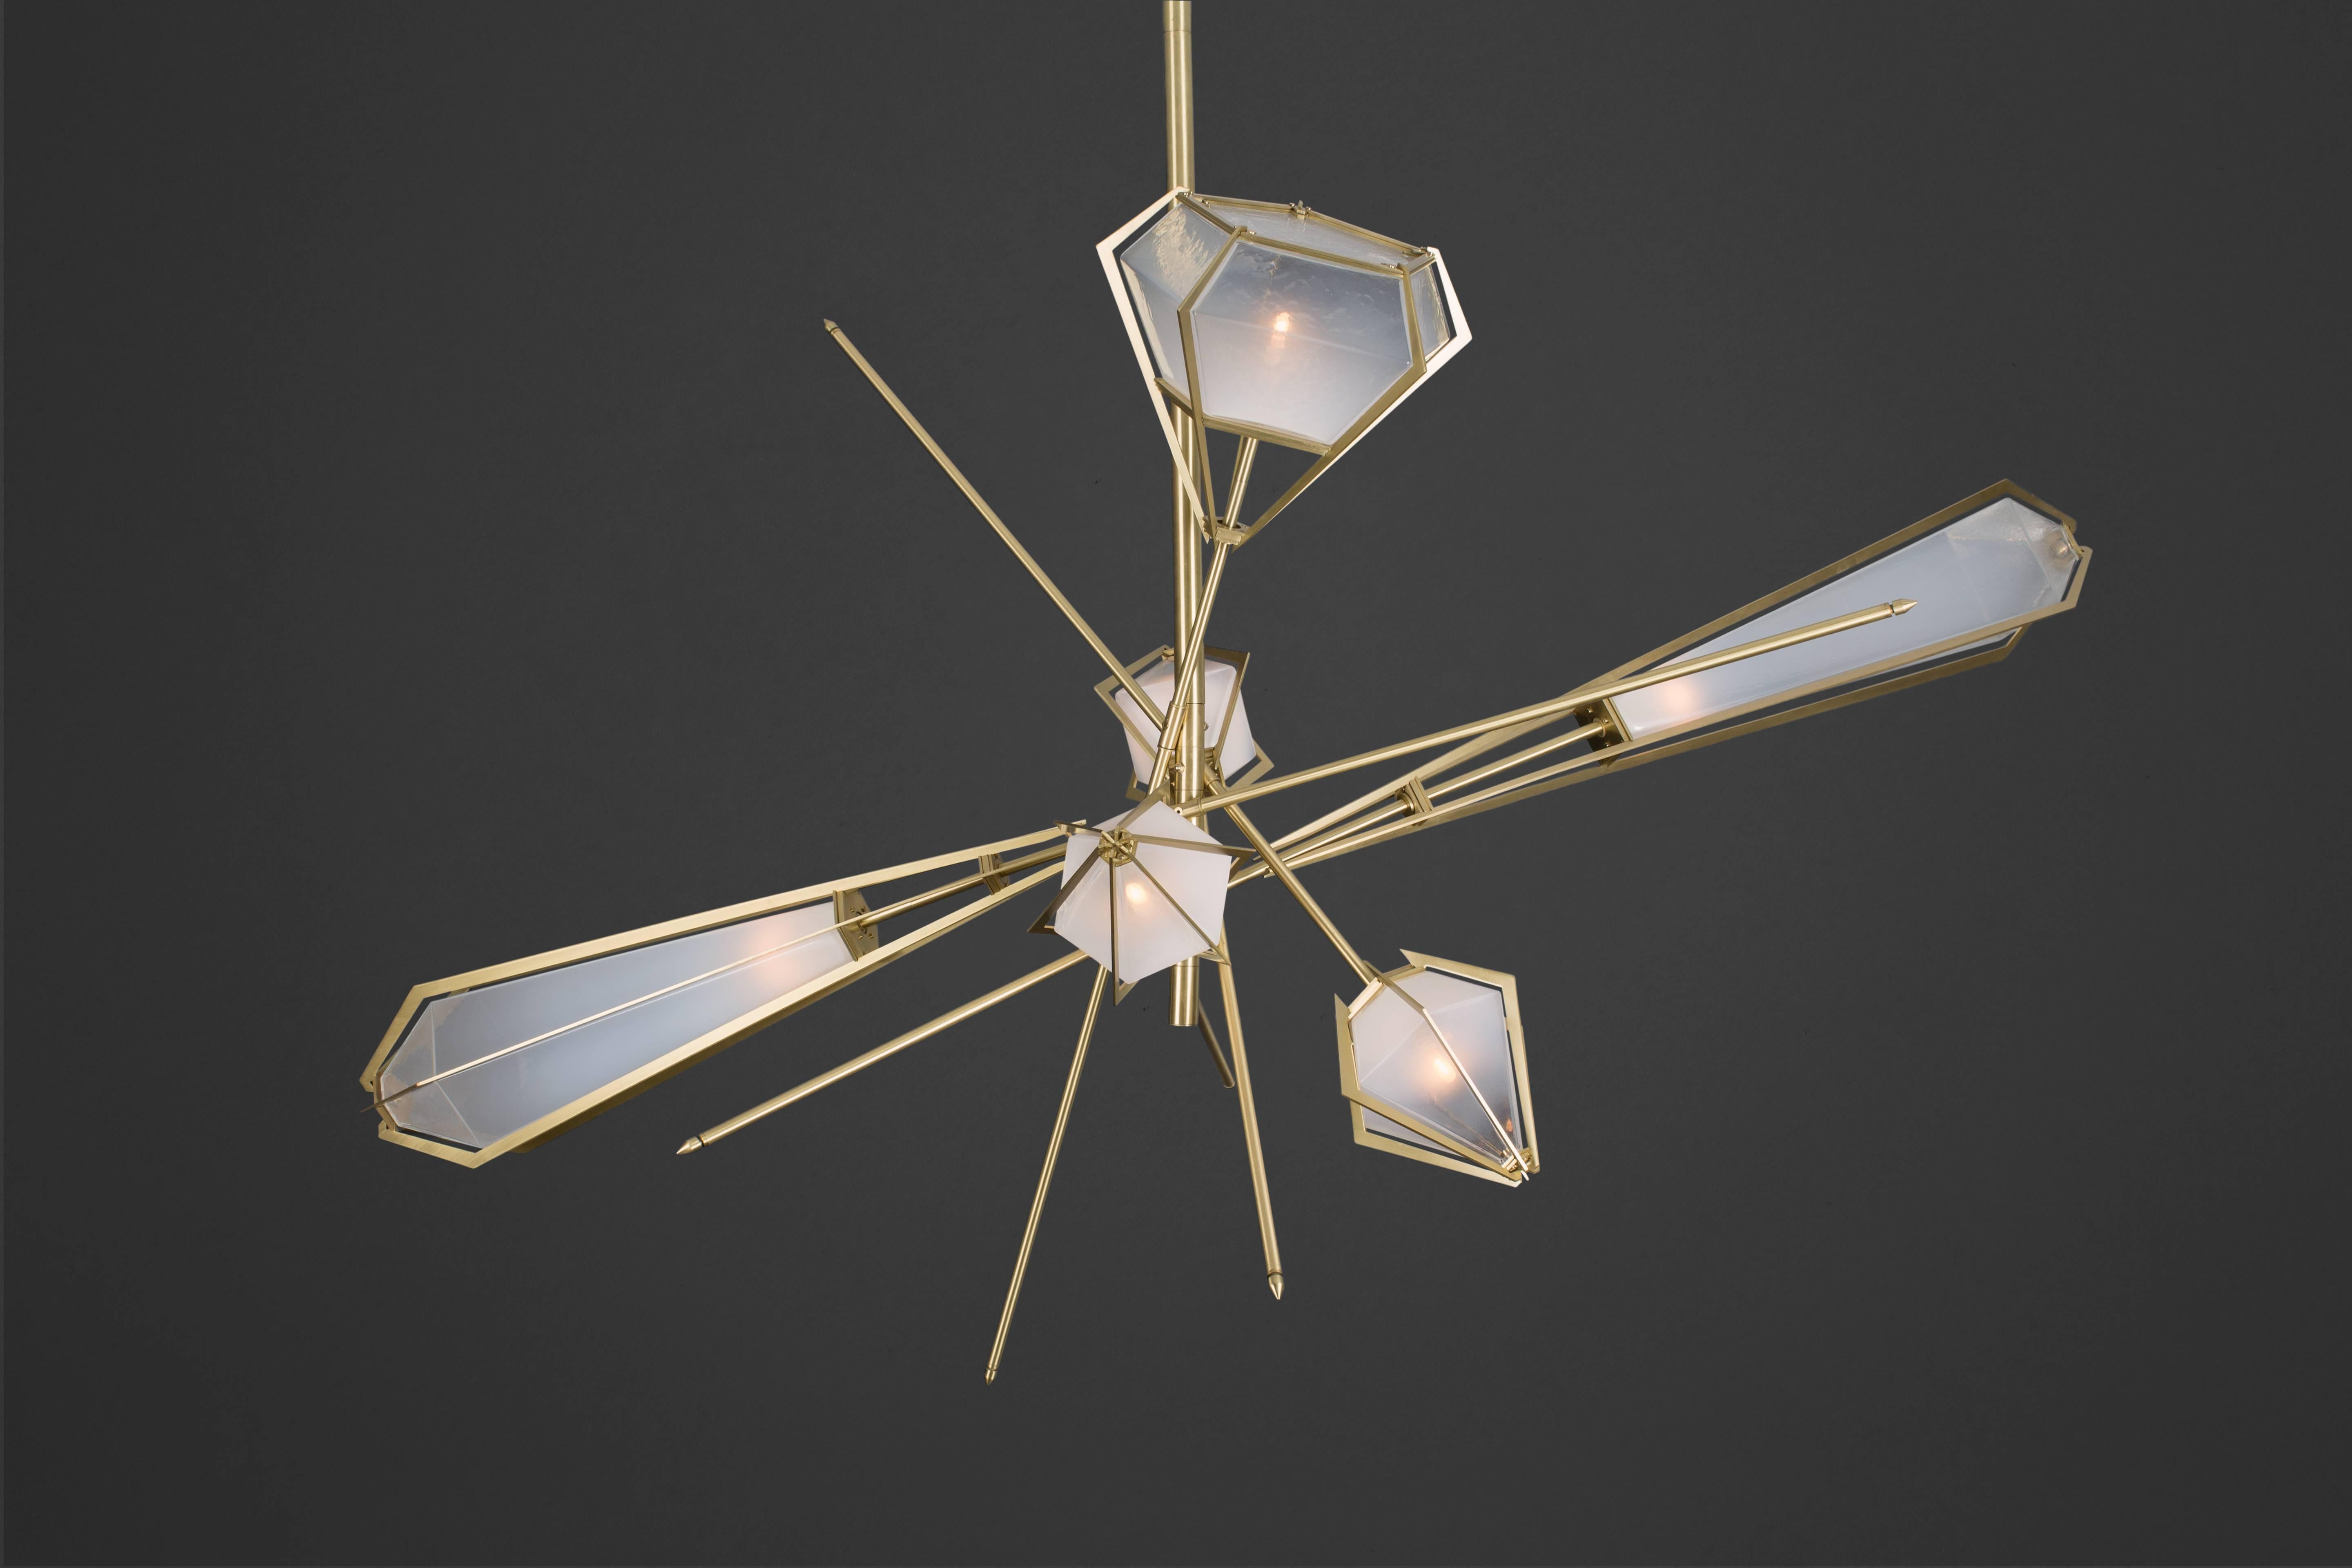 Elegant sculptural light-fixture inspired by jewelry design featuring a mould-blown glass gem in a chic metallic setting to create an asymmetrical starburst of light.

Harlow is available in various color ways, and held in a metallic frame